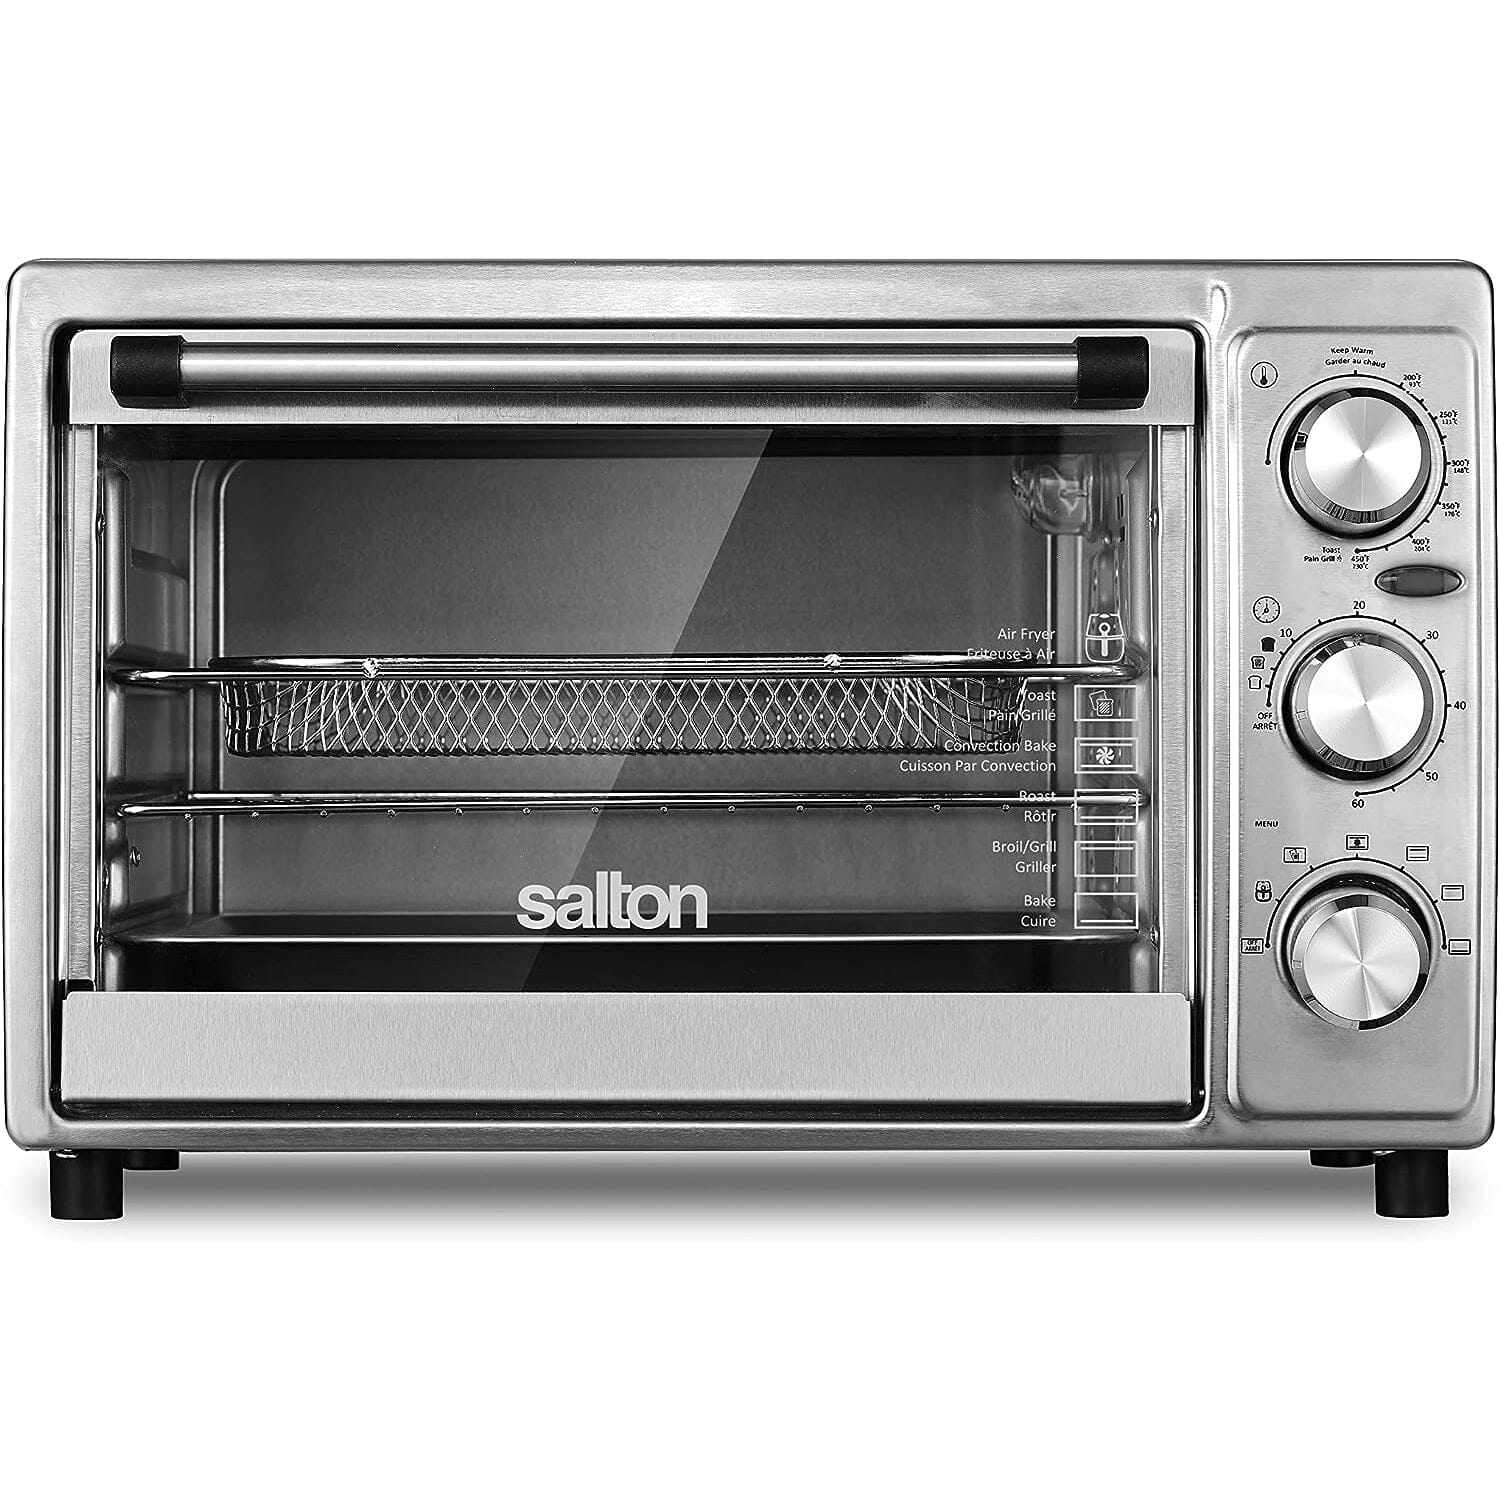 Galanz Air Fryer Toaster Oven, Stainless Steel